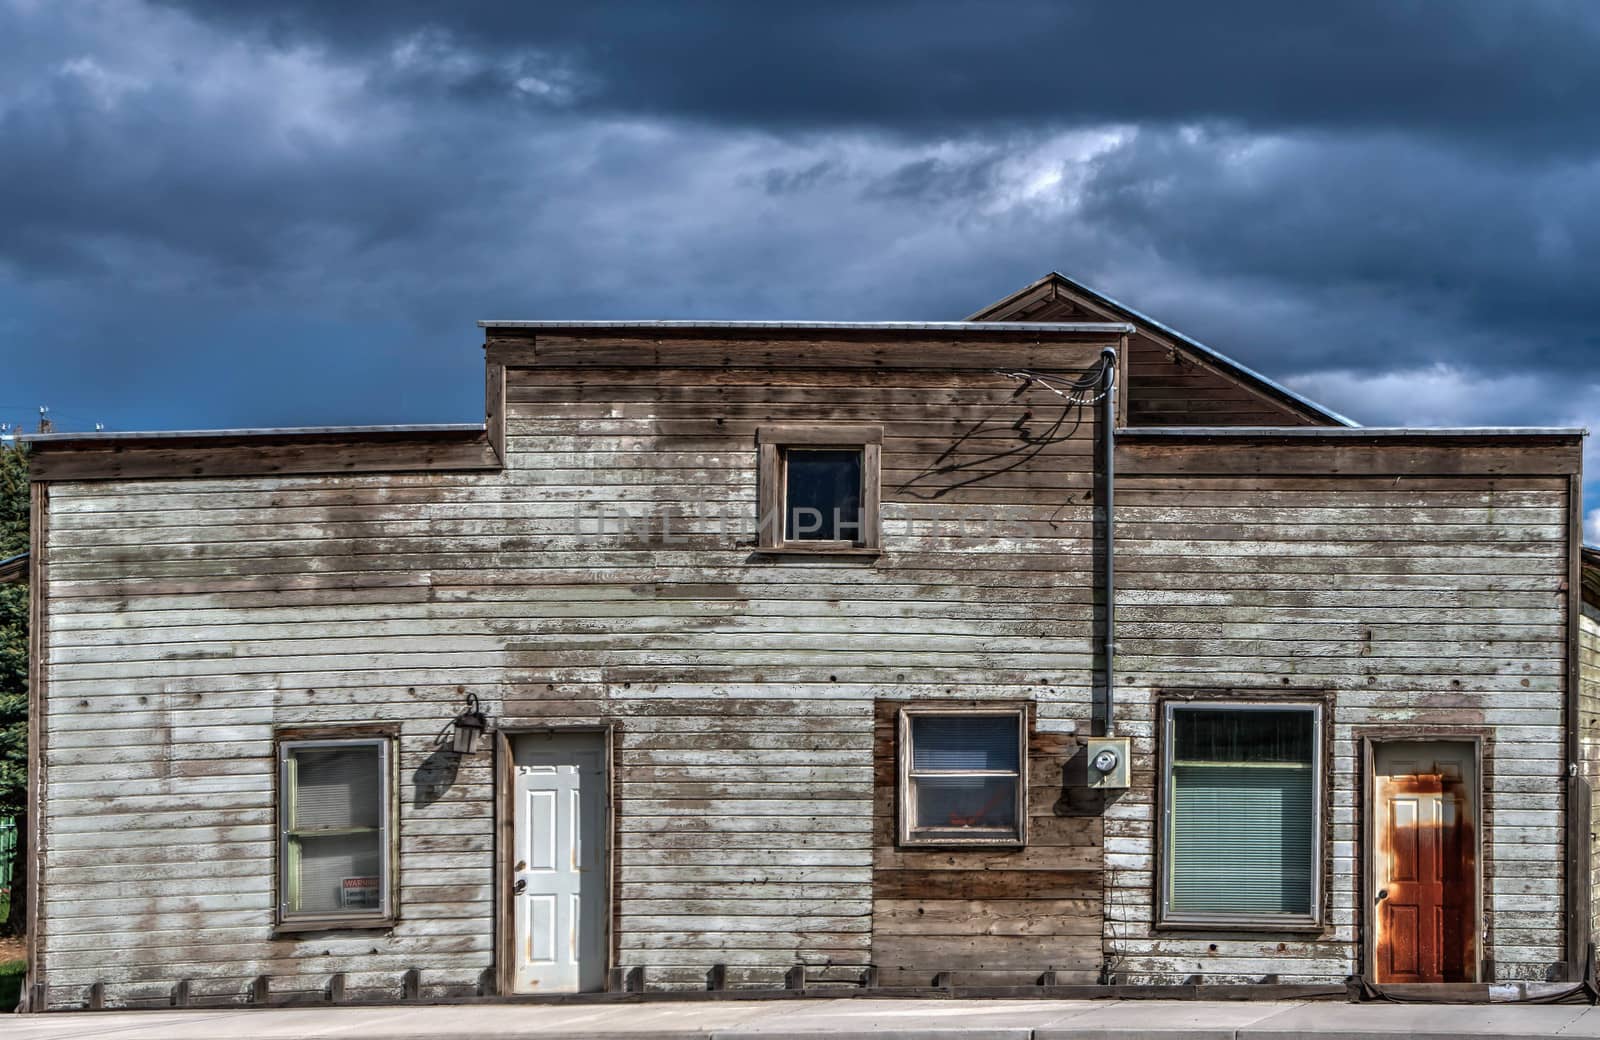 Weathered store front in rural washington. by cestes001